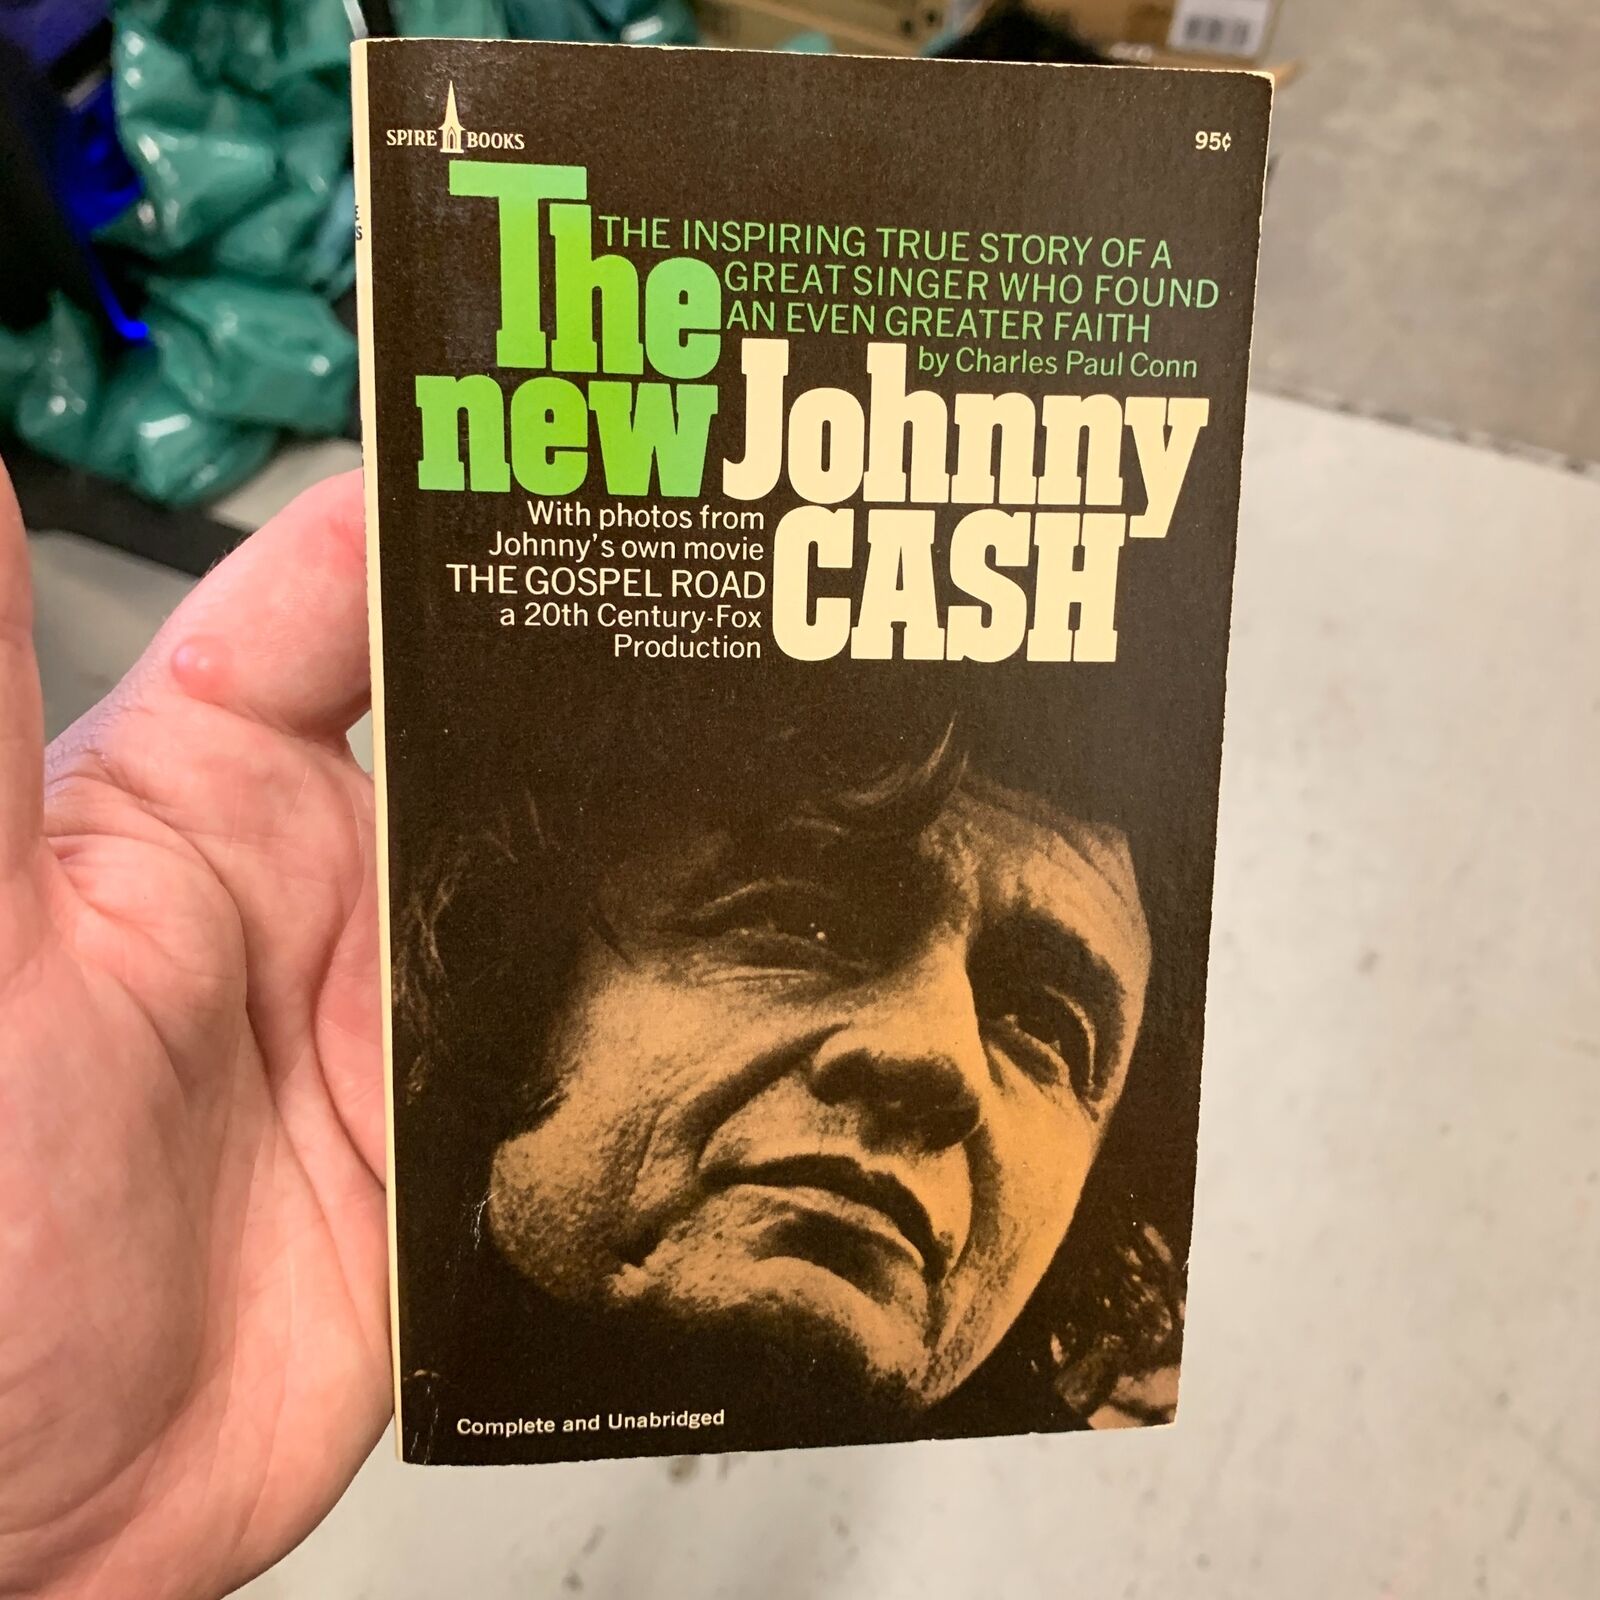 THE NEW JOHNNY CASH Charles Paul Conn - Christian Paperback Musician (1976)